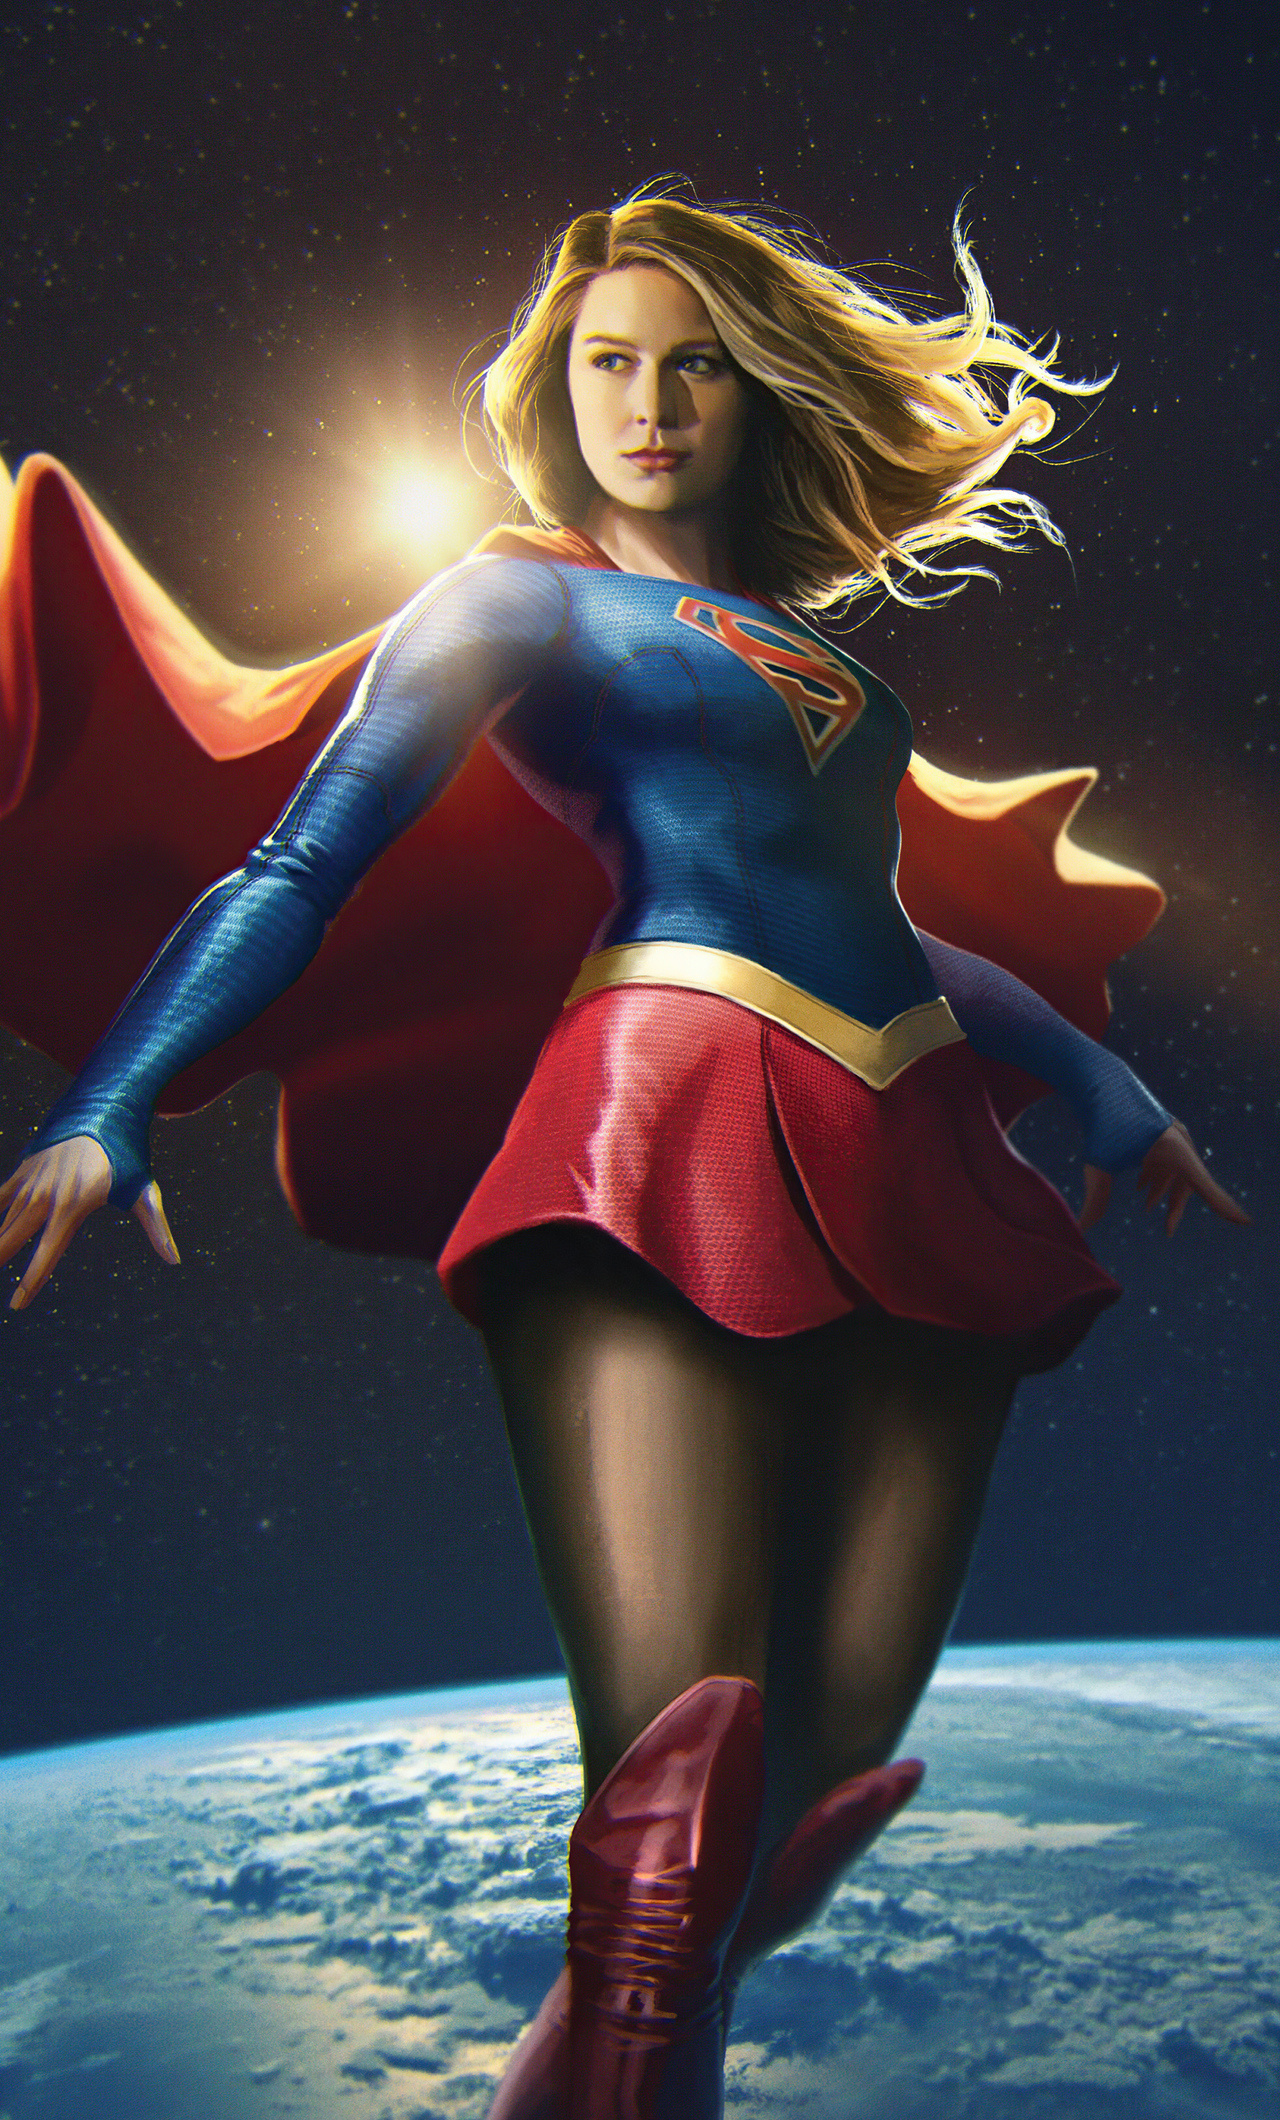 Supergirl in Central City, Superhero iPhone 6, HD 4K wallpapers, 1280x2120 HD Handy